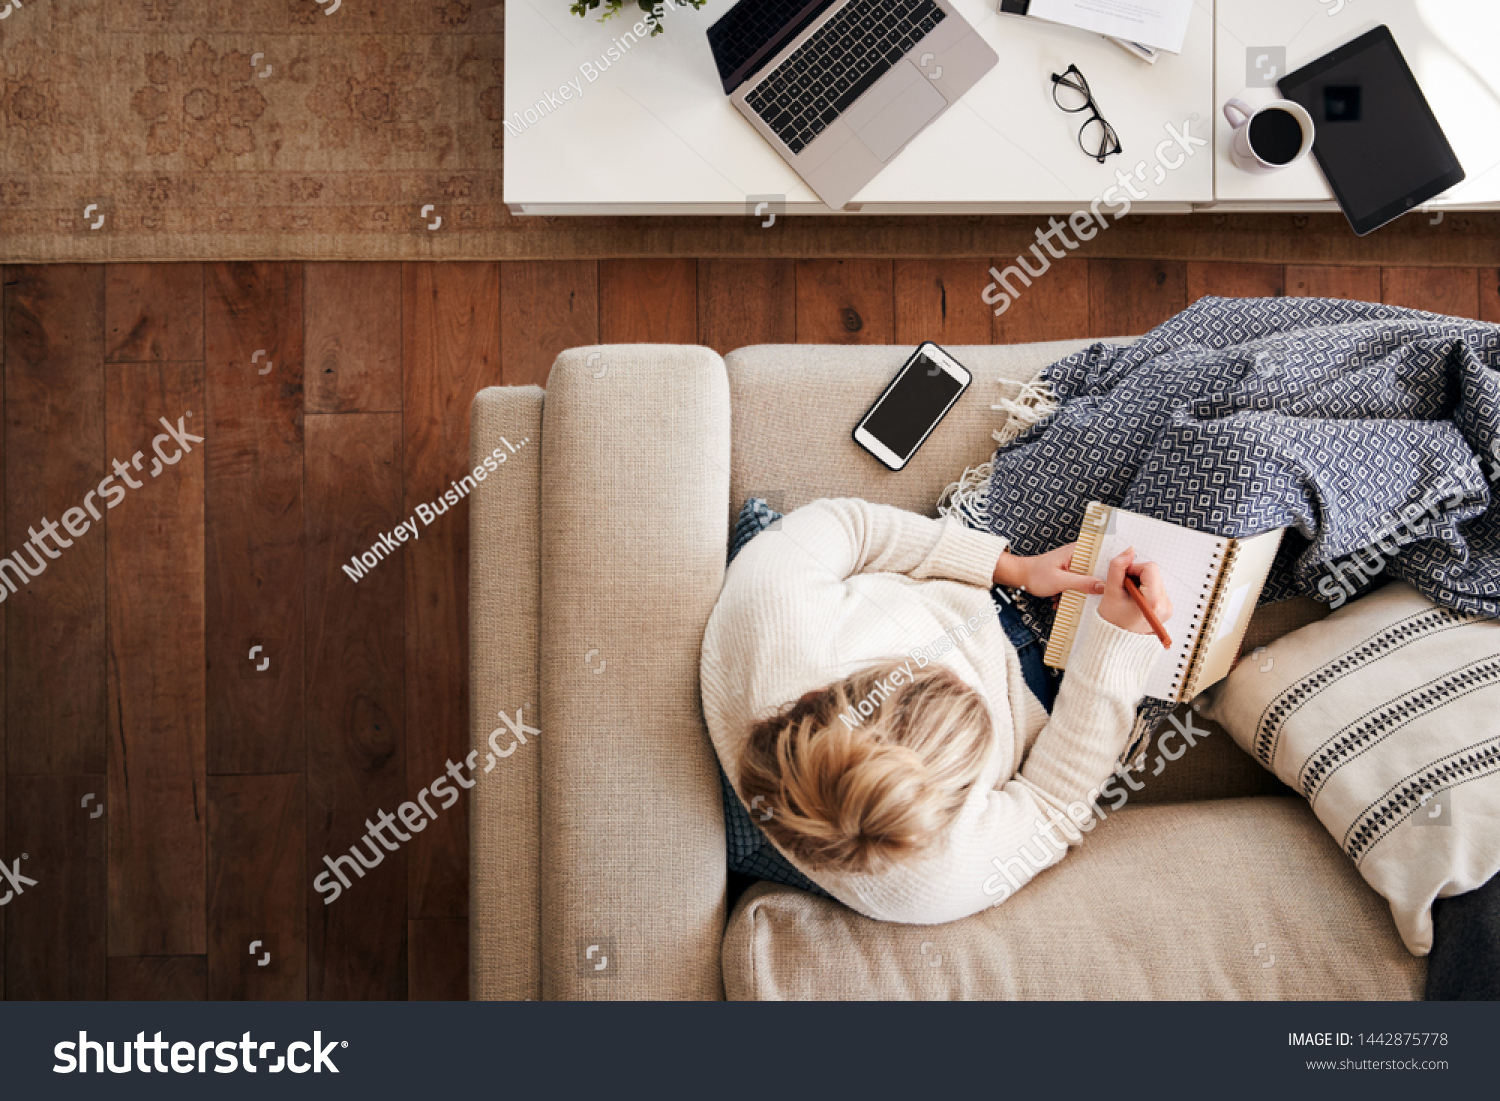 Overhead Shot Looking Down On Woman Working As Social Media Influencer At Home Lying On Sofa #1442875778